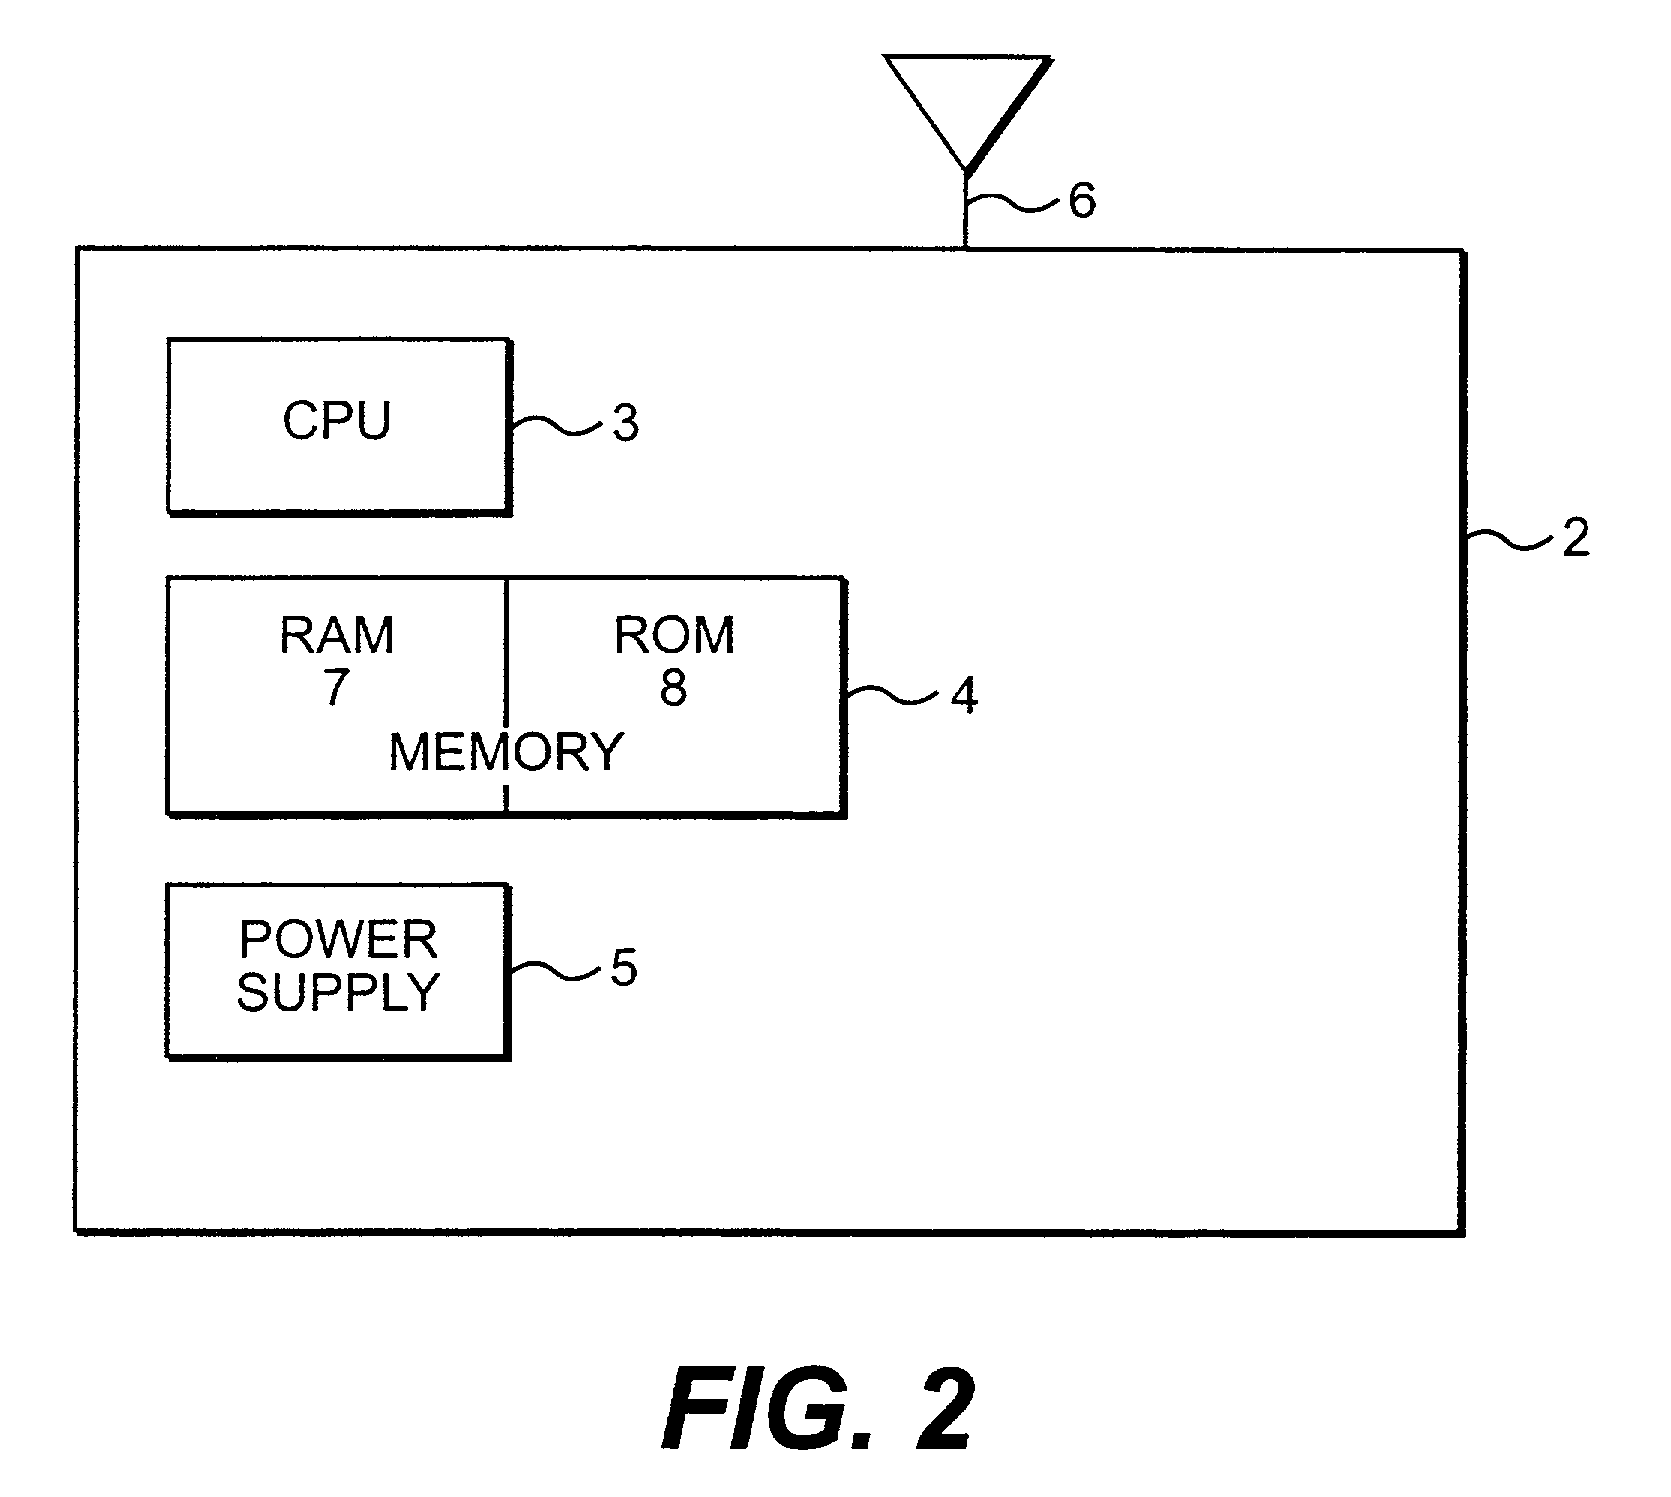 Architecture and mechanism for forwarding layer interfacing for networks